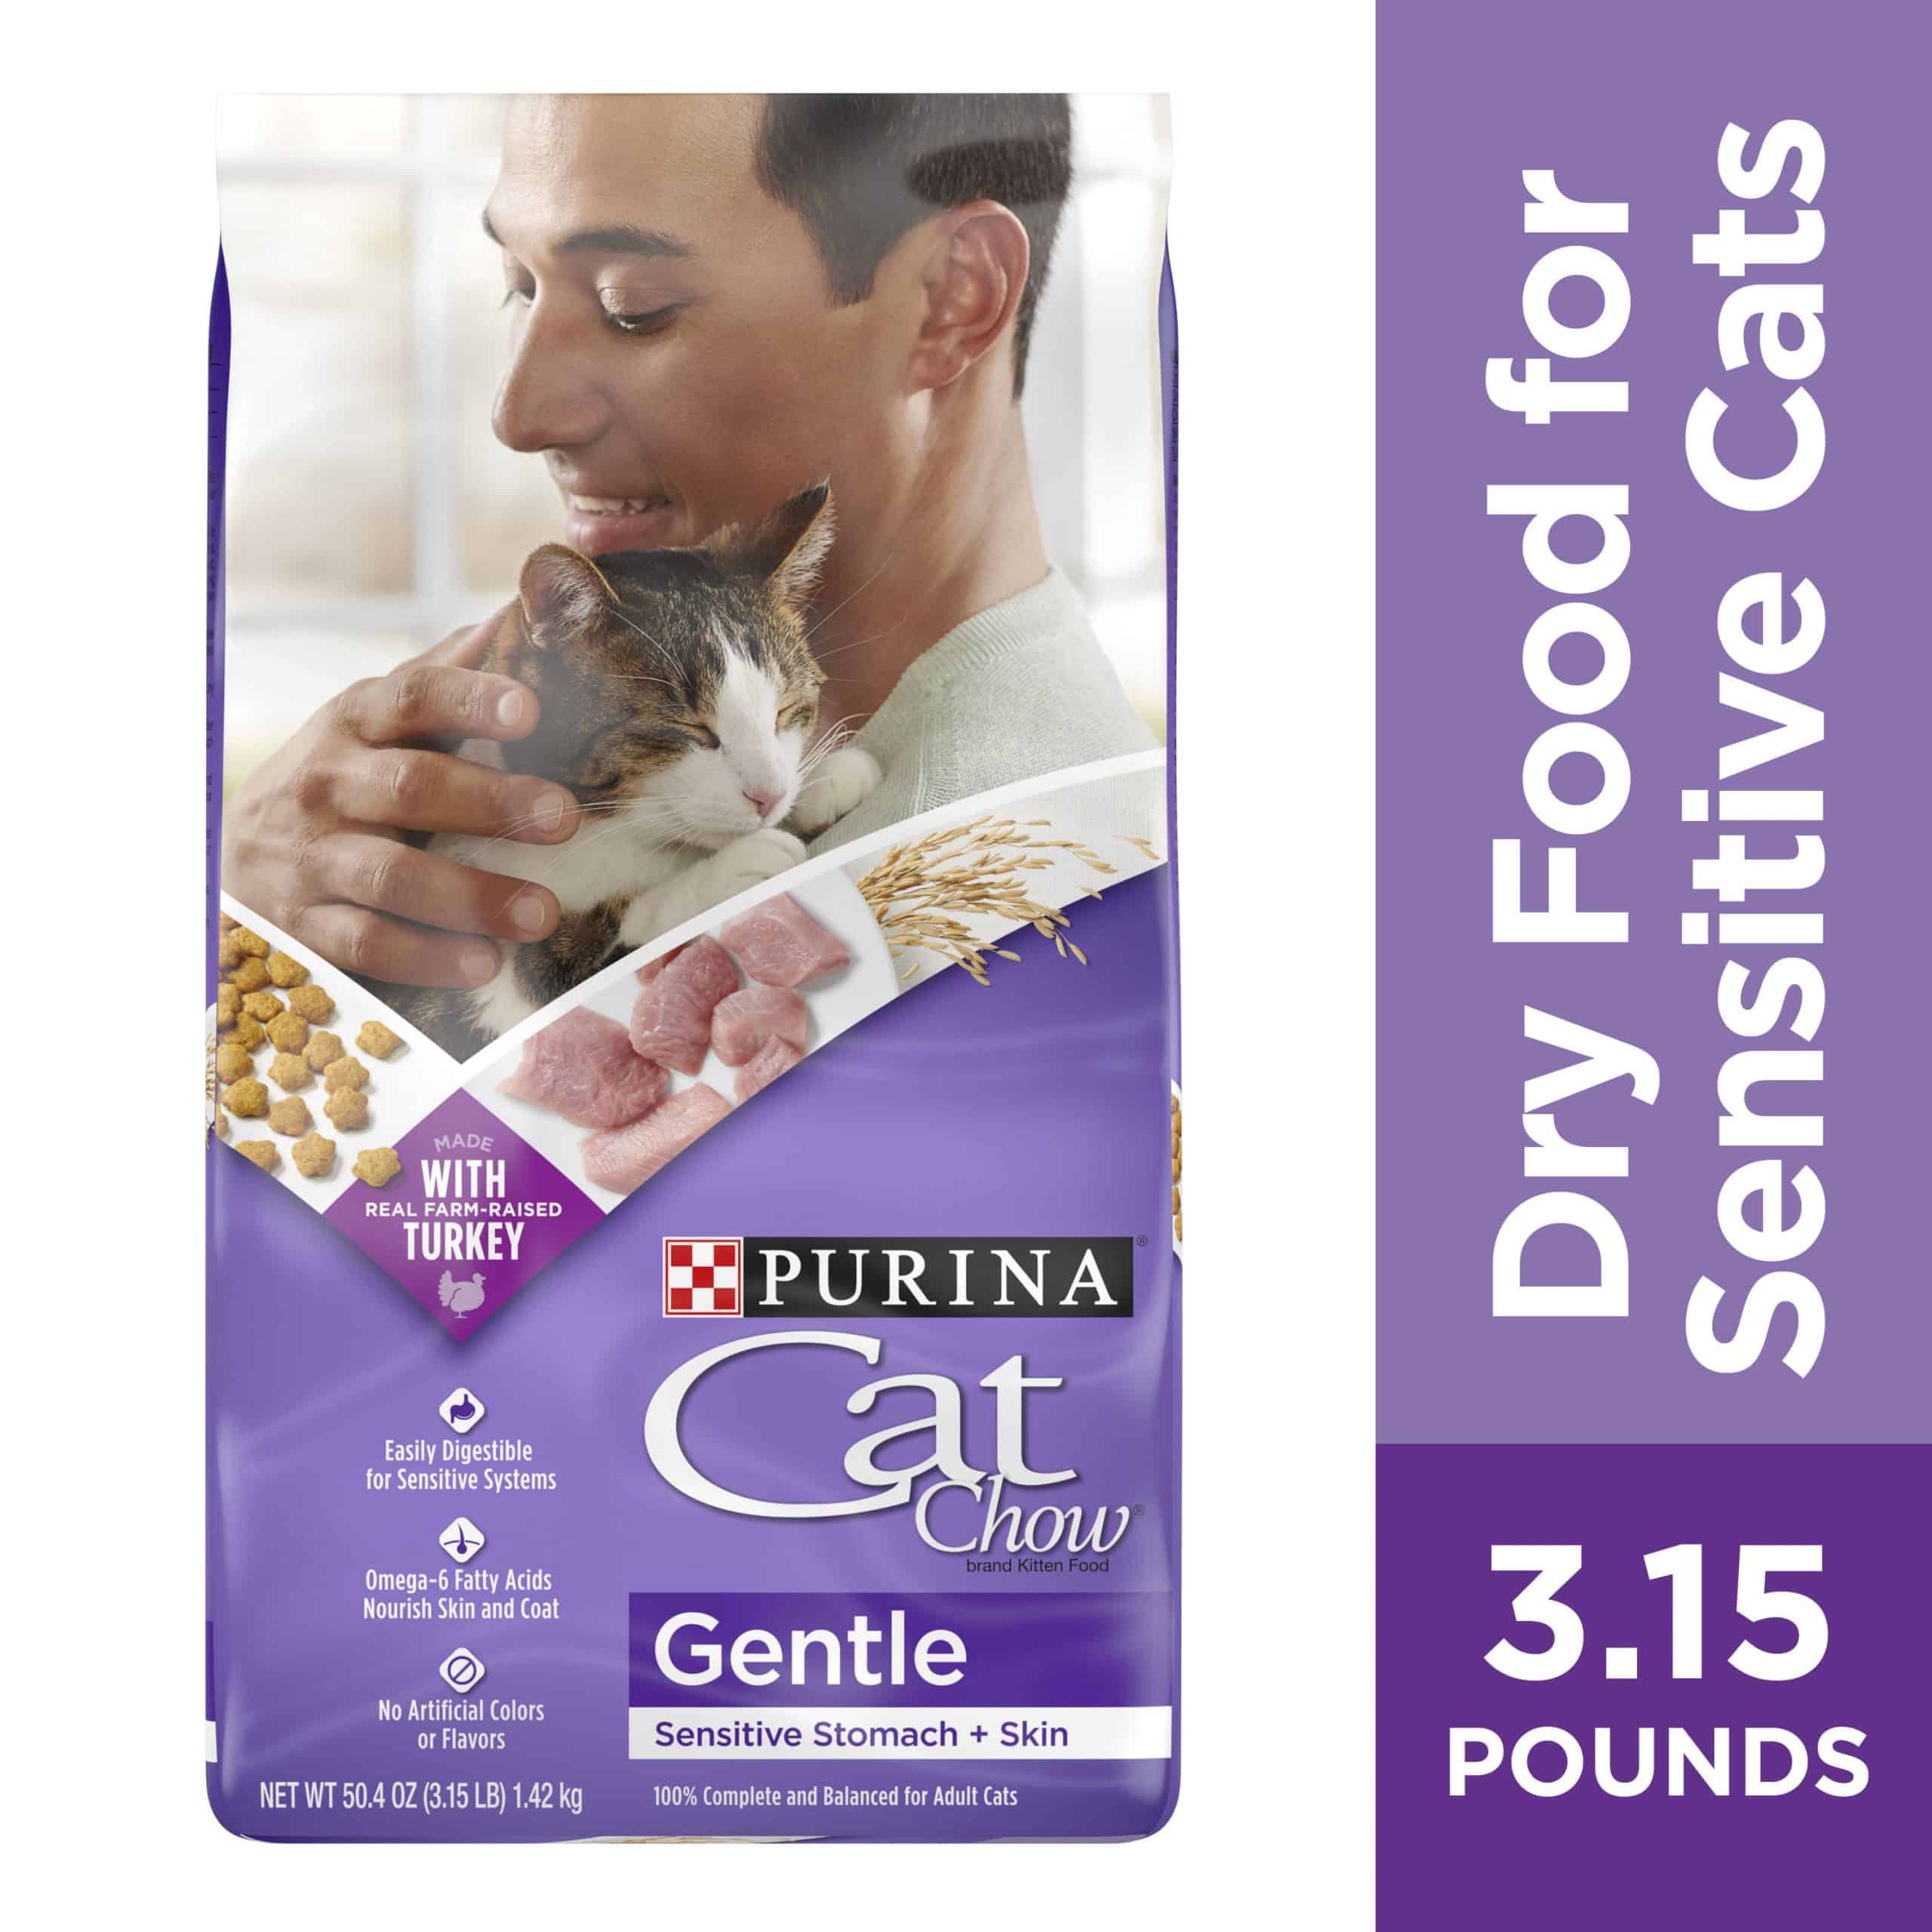 Purina Cat Chow Gentle Dry Cat Food, Sensitive Stomach + Skin, 3.15 lb ...